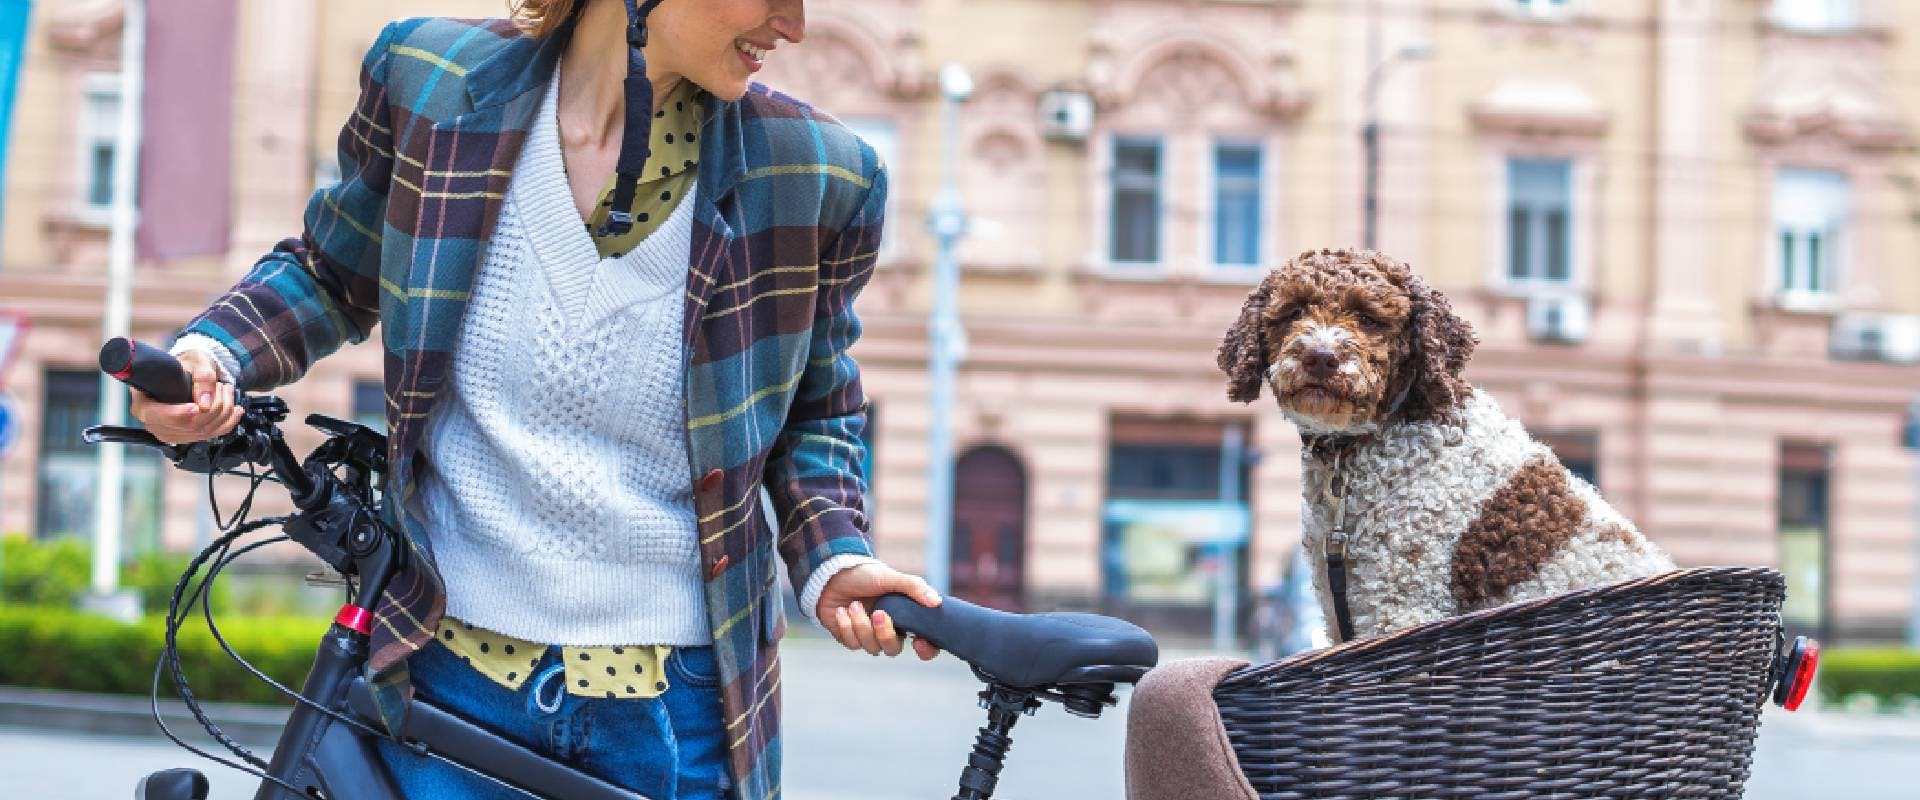 Person with a dog in a bicycle basket